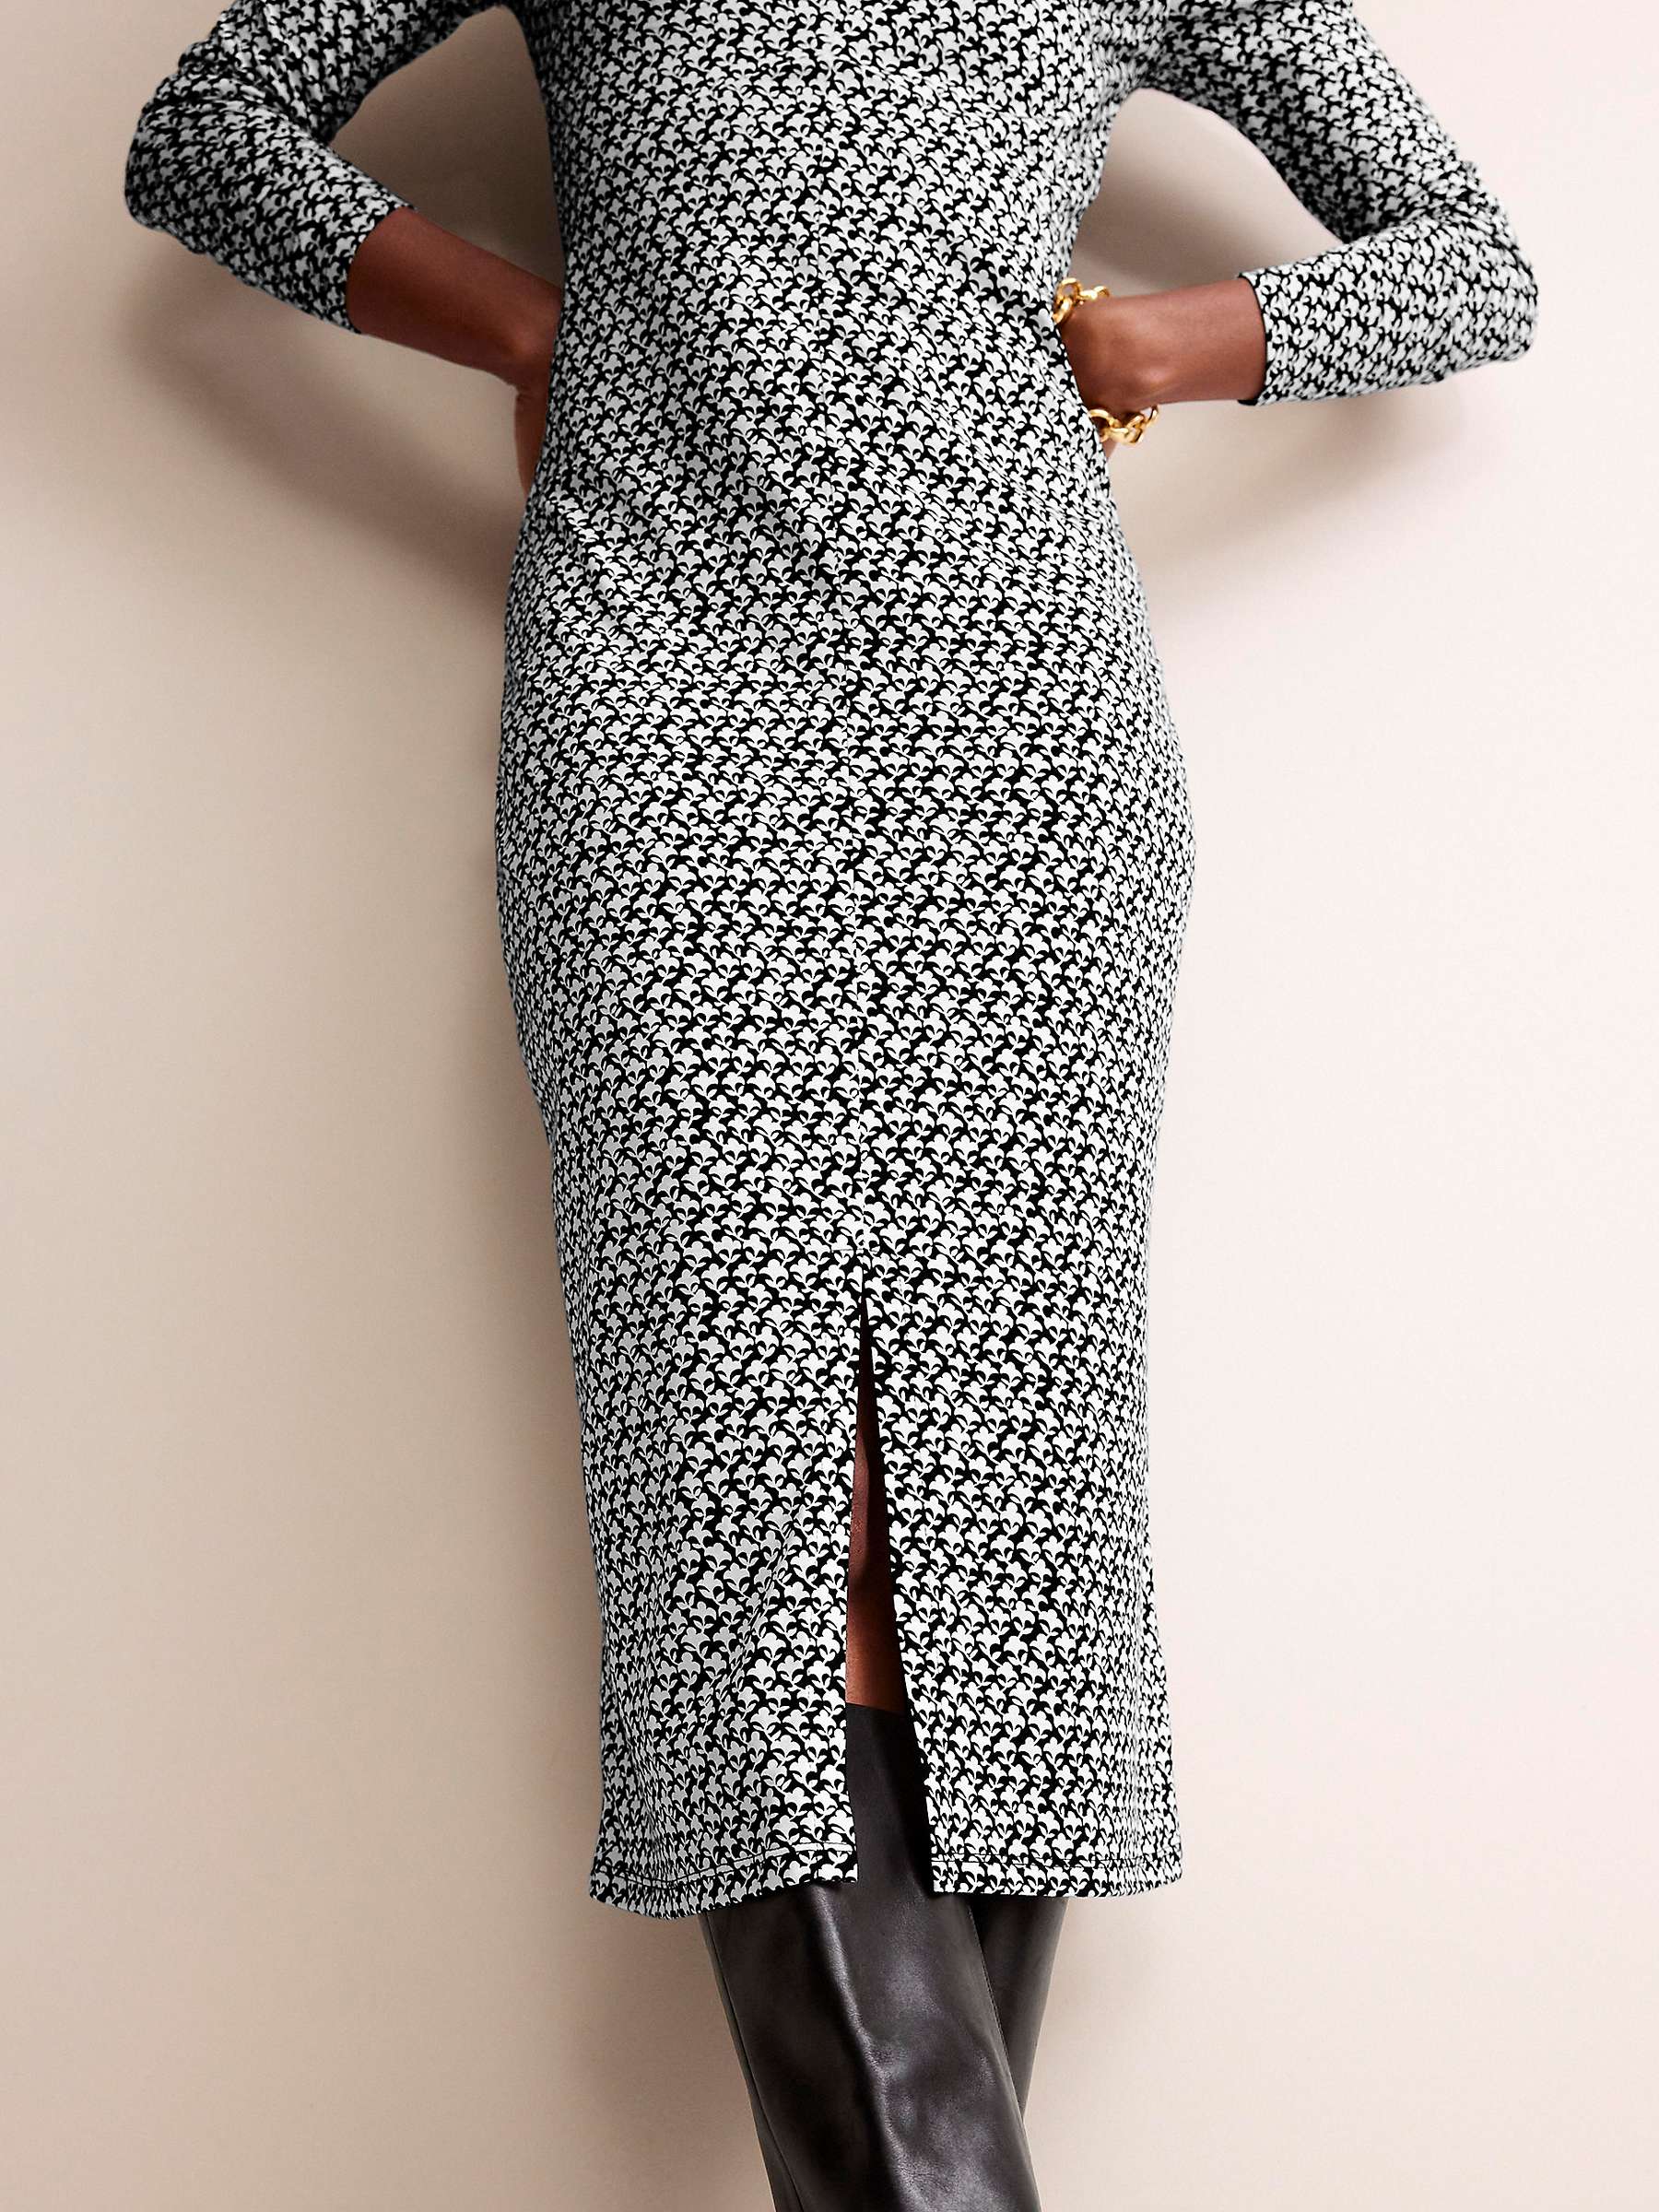 Boden Empire Knot Midi Dress, Lily Sprig at John Lewis & Partners